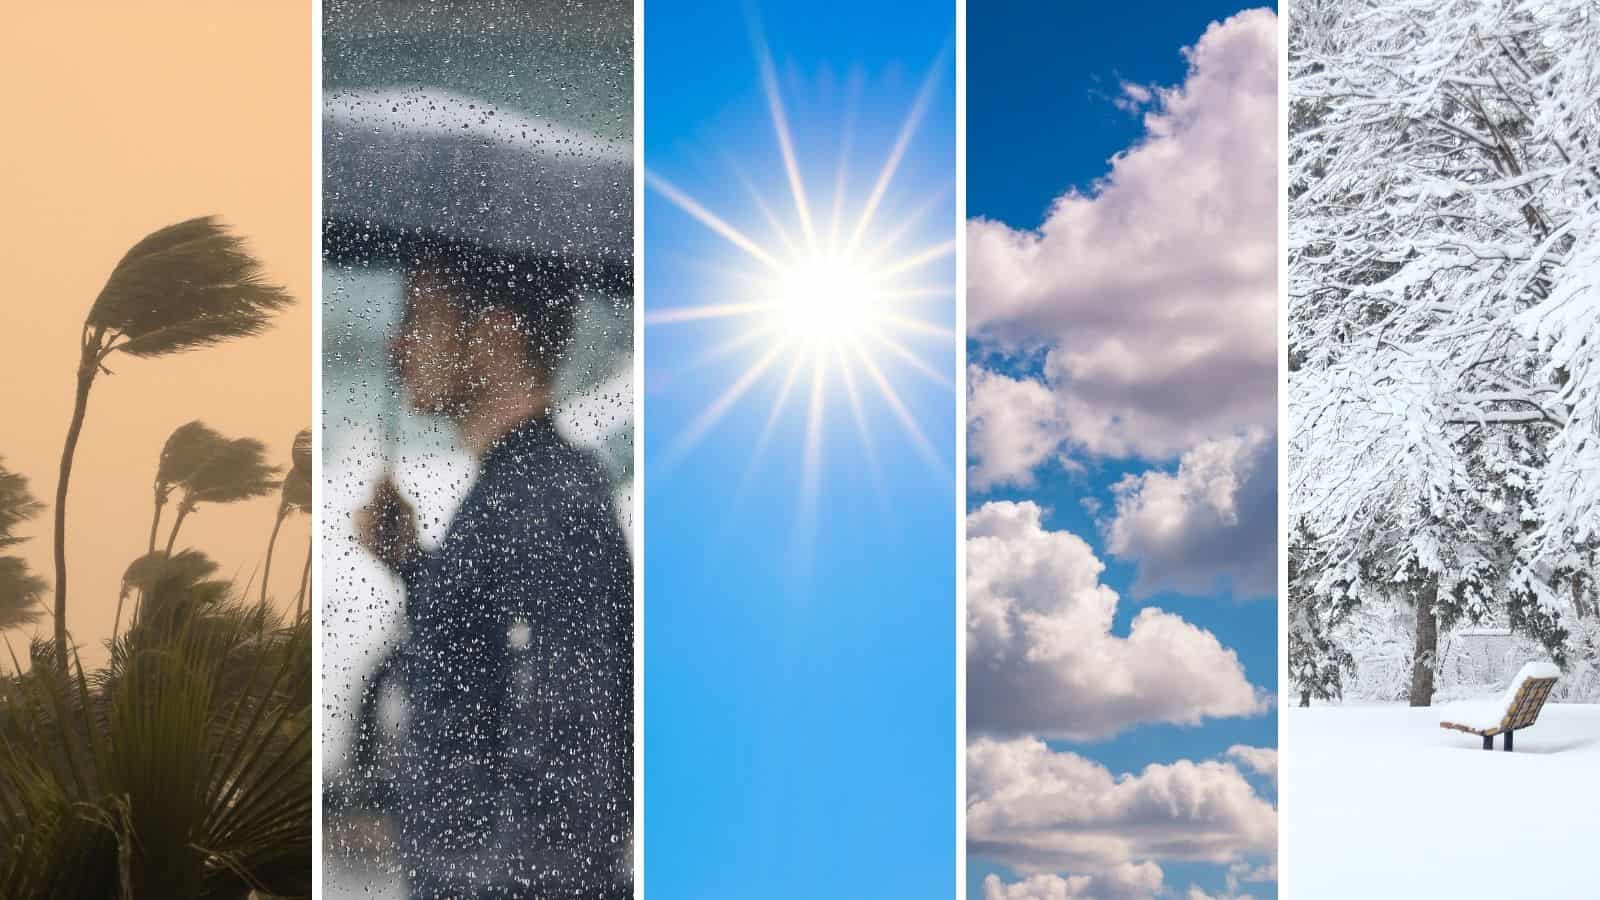 Types of weather including wind; rain; heat; clouds, snow.